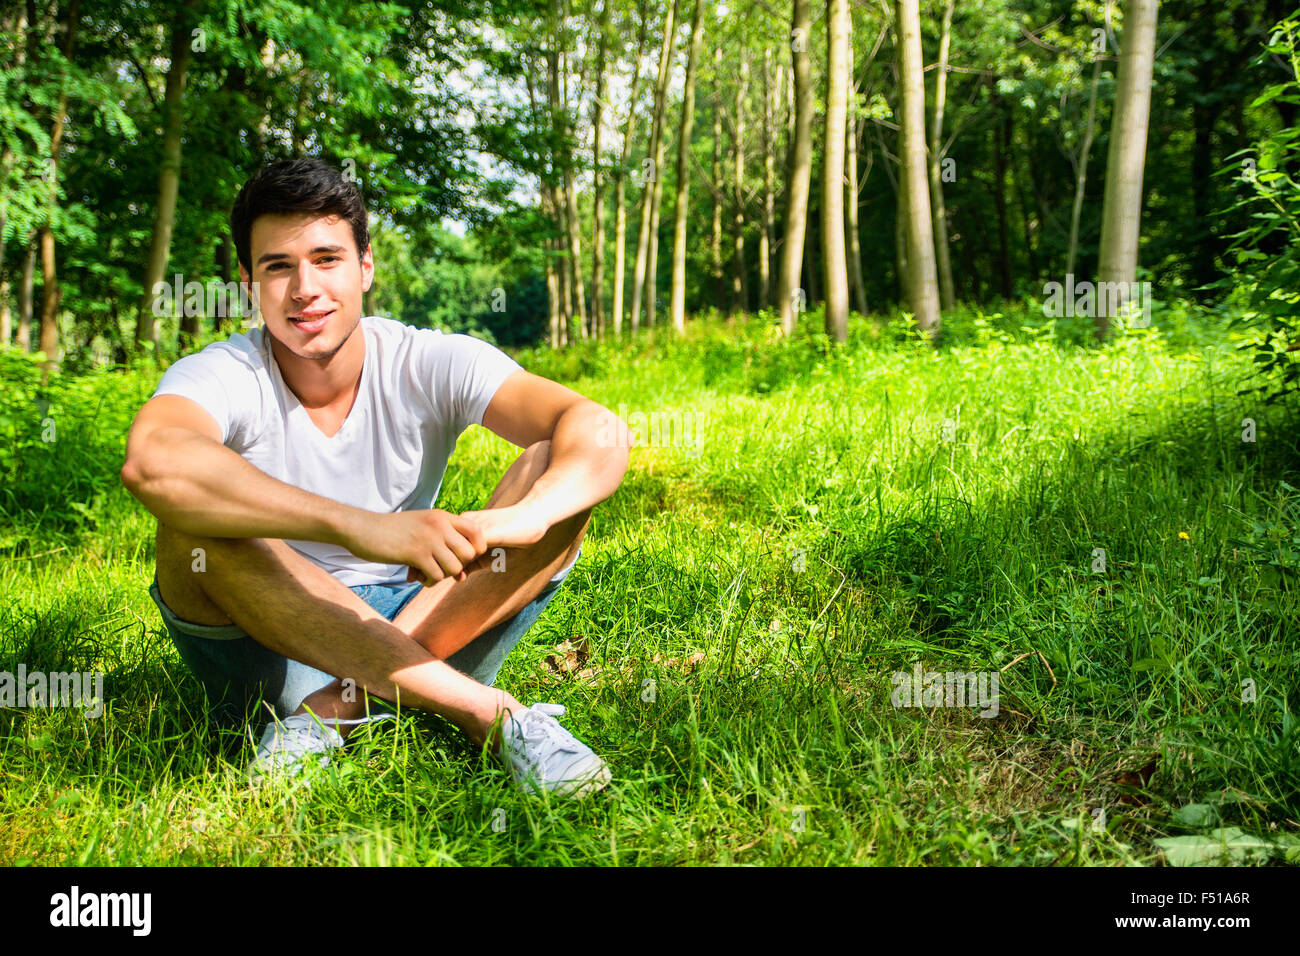 Attractive, fit young man relaxing sitting on lawn grass in the countryside among trees, looking at camera, smiling Stock Photo